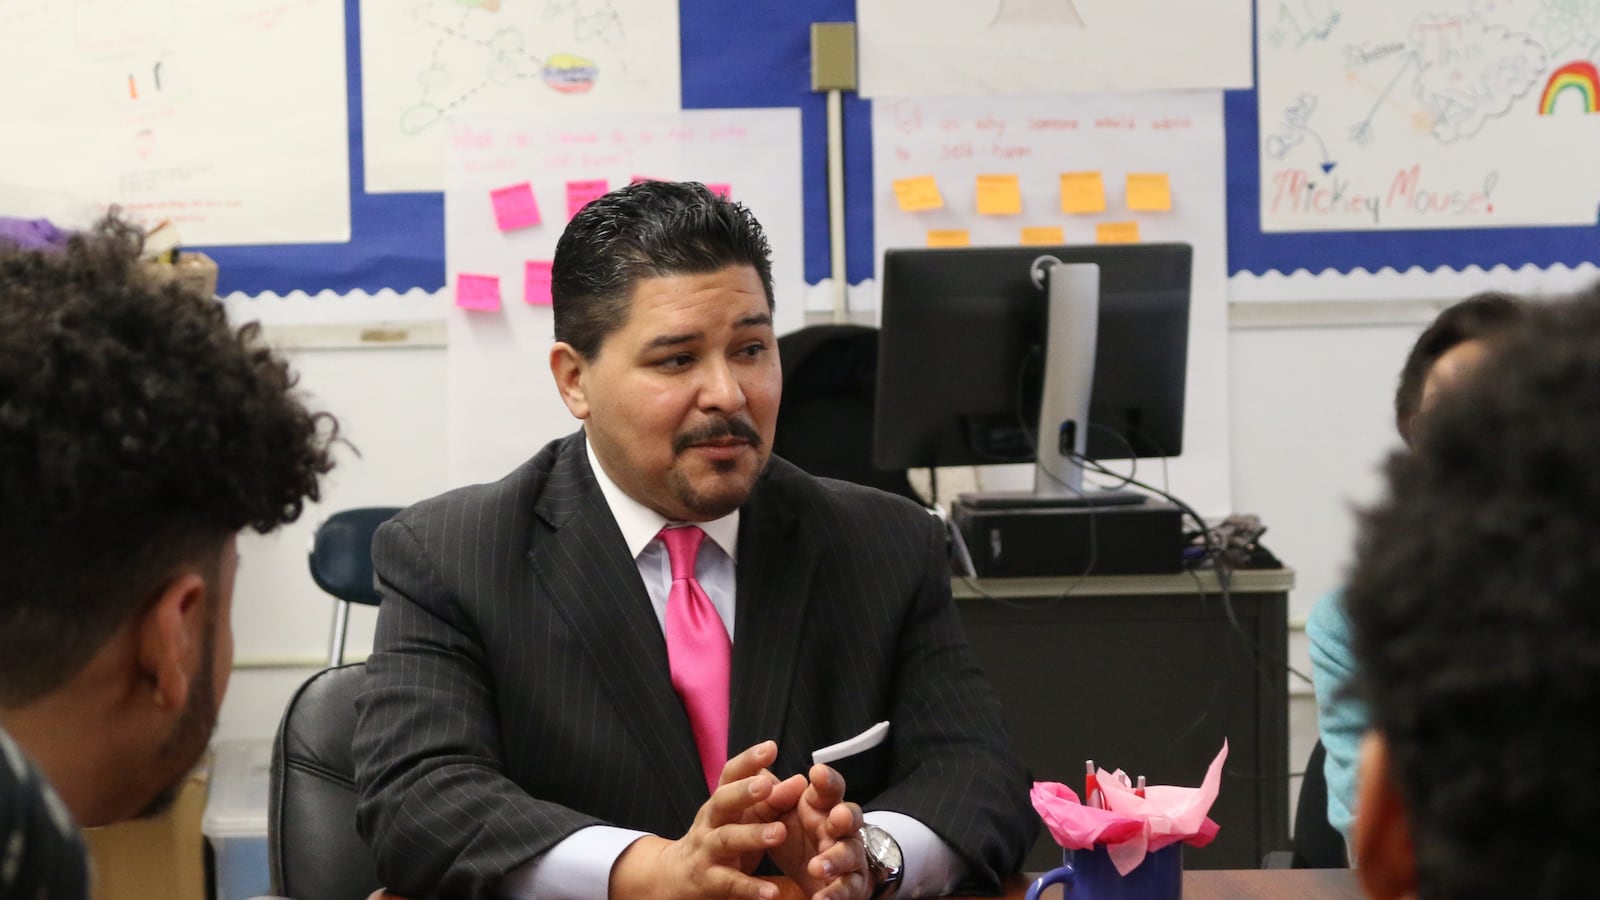 Chancellor Carranza speaks to students at Orchard Collegiate Academy.